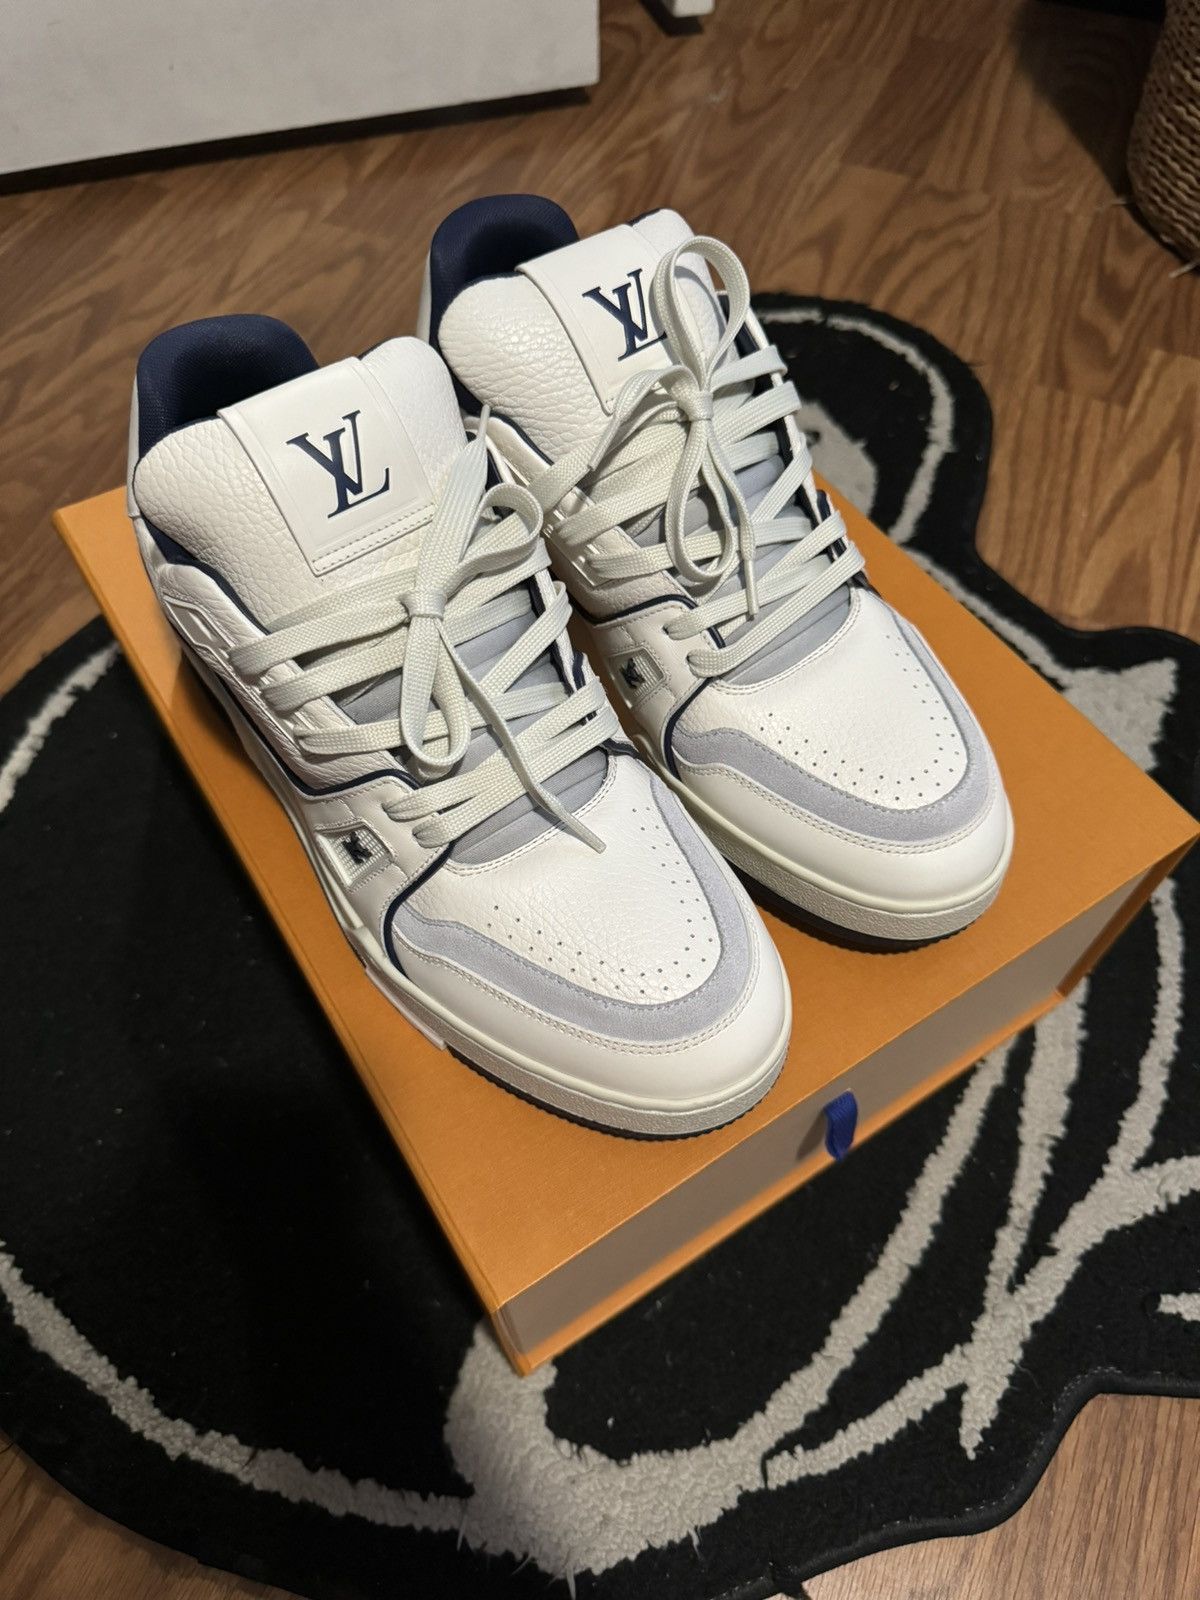 Louis vuitton Trainers LV Trainer white SS21 size 7 40 Eu for Sale in